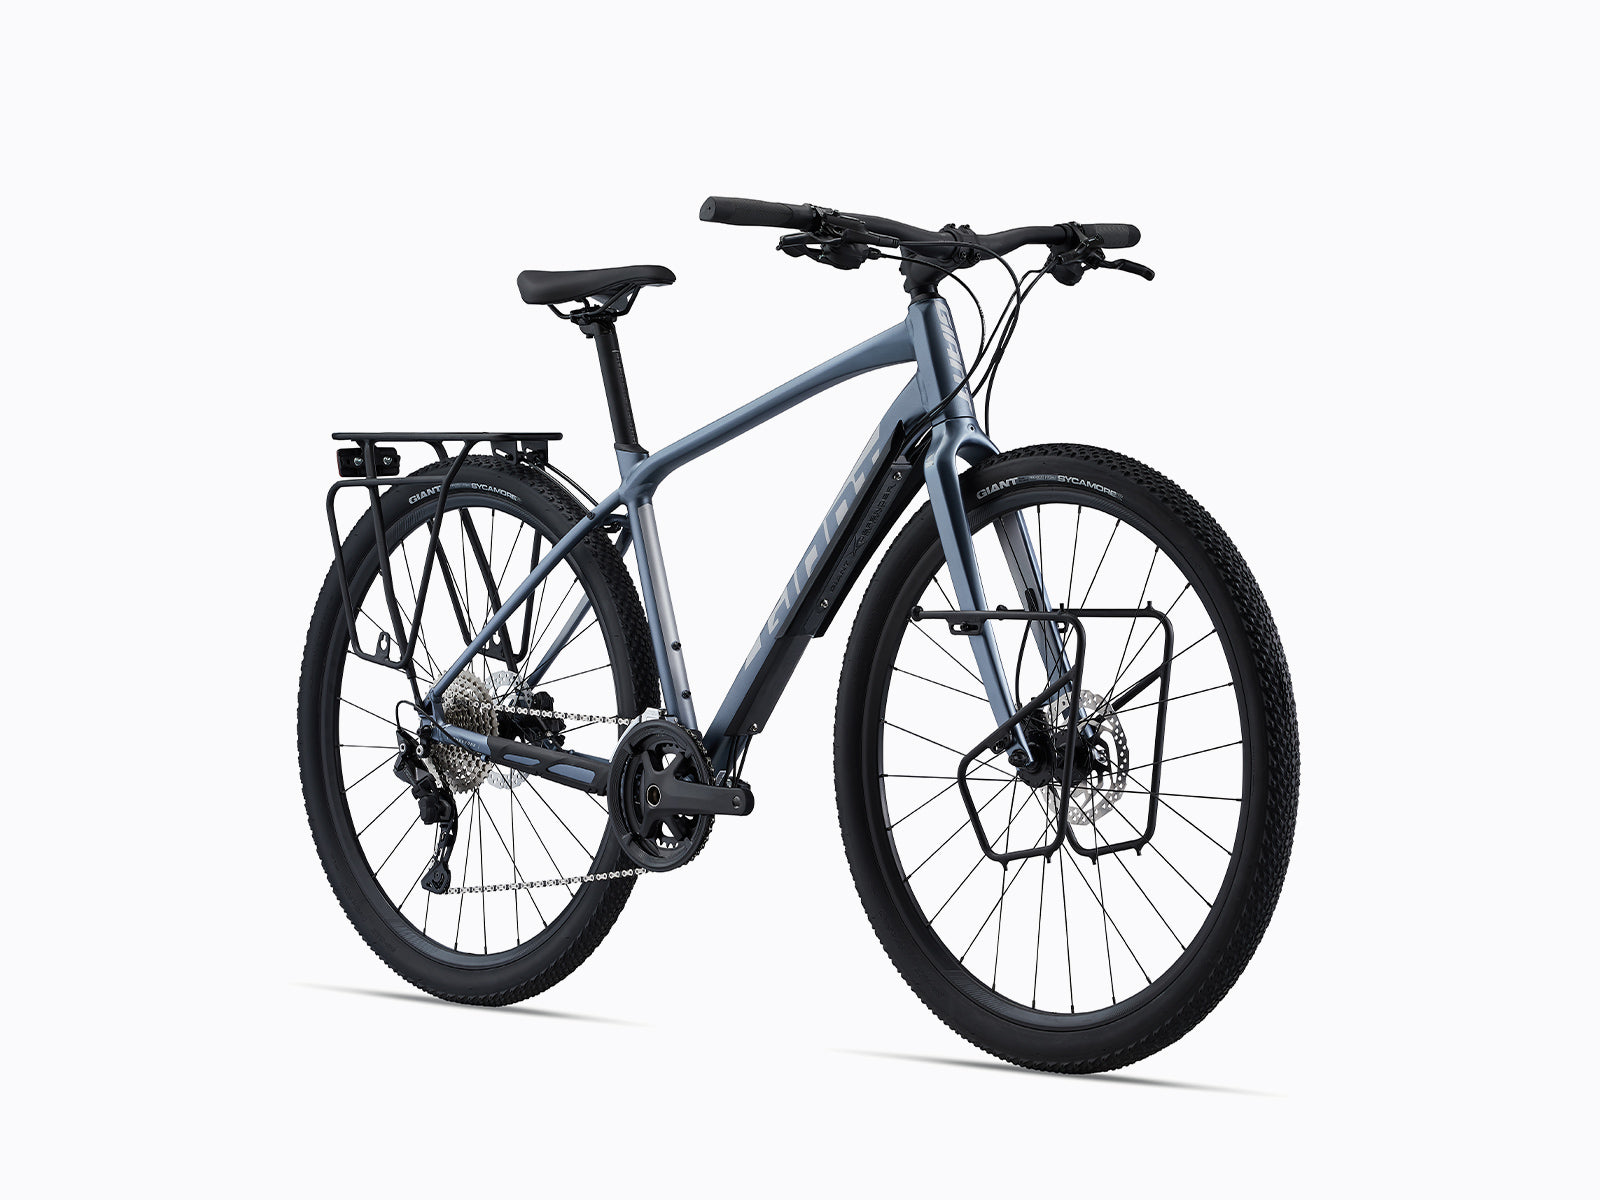 image features the Giant ToughRoad SLR 1, an commuter bicycle from Giant's commuter cycles collection. Now available at Giant Melbourne, a bike shop in Australia